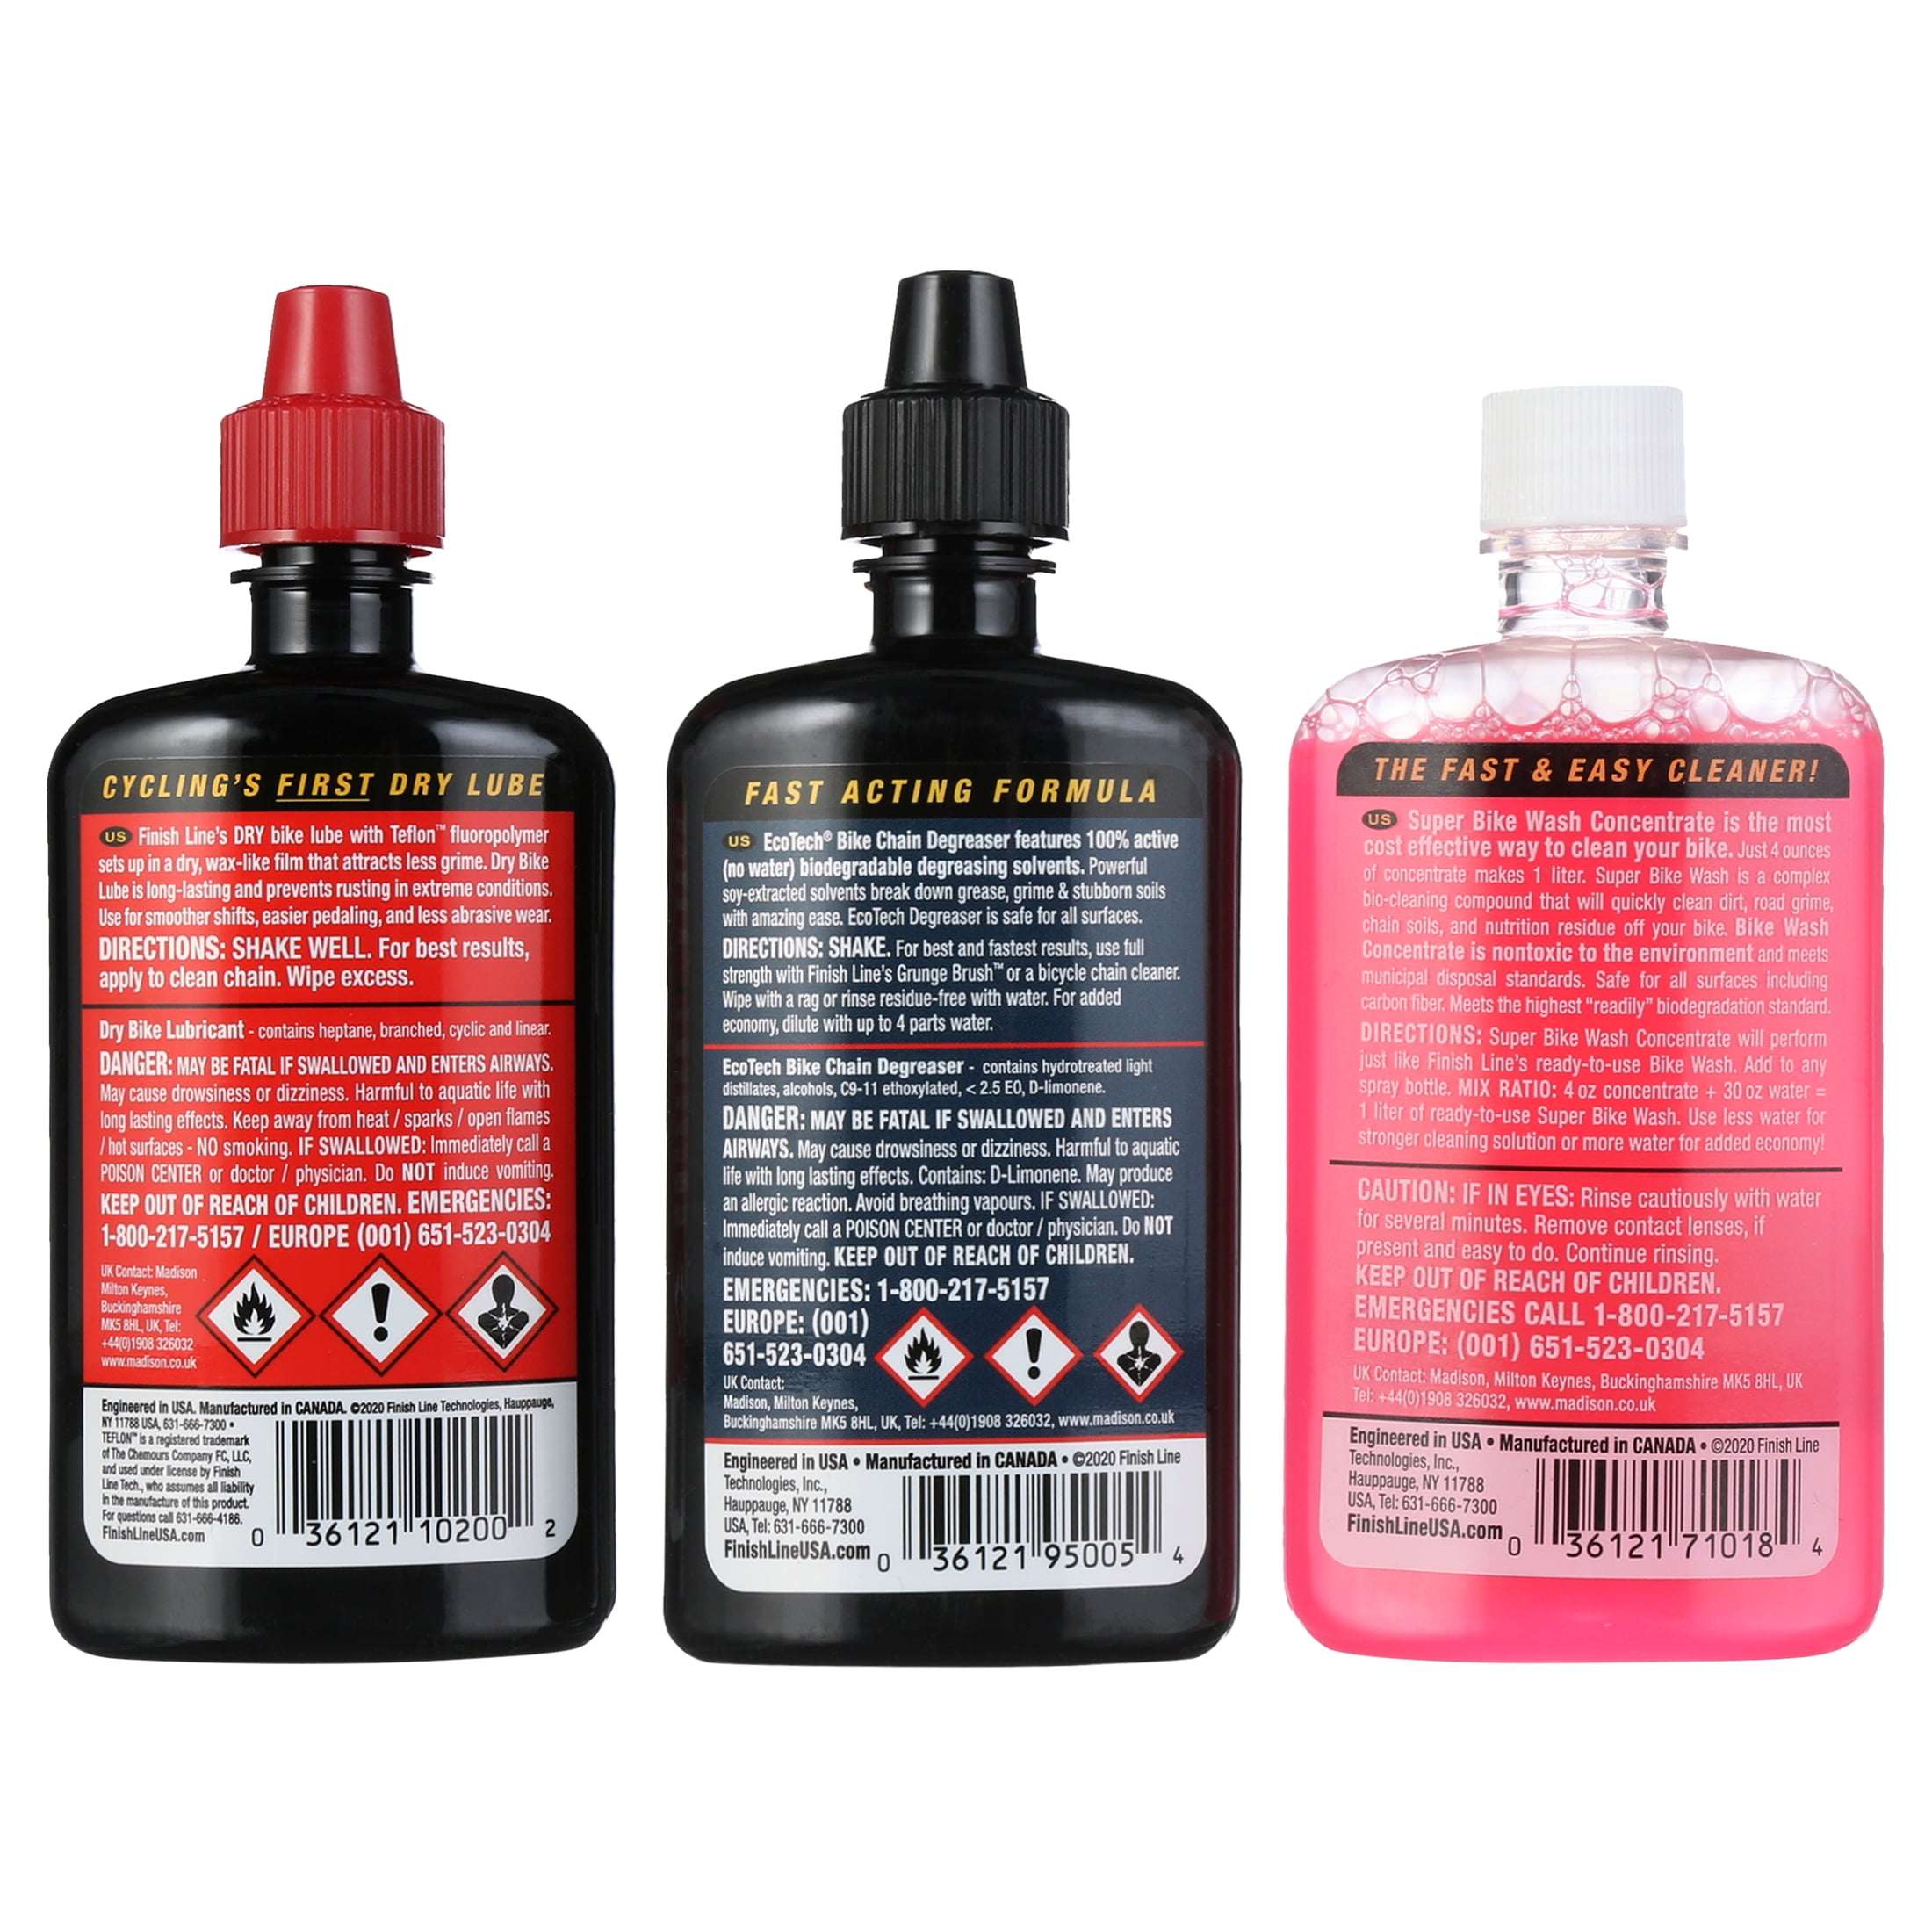 Finish Line Super Bike Wash and Speed Bike Degreaser Review